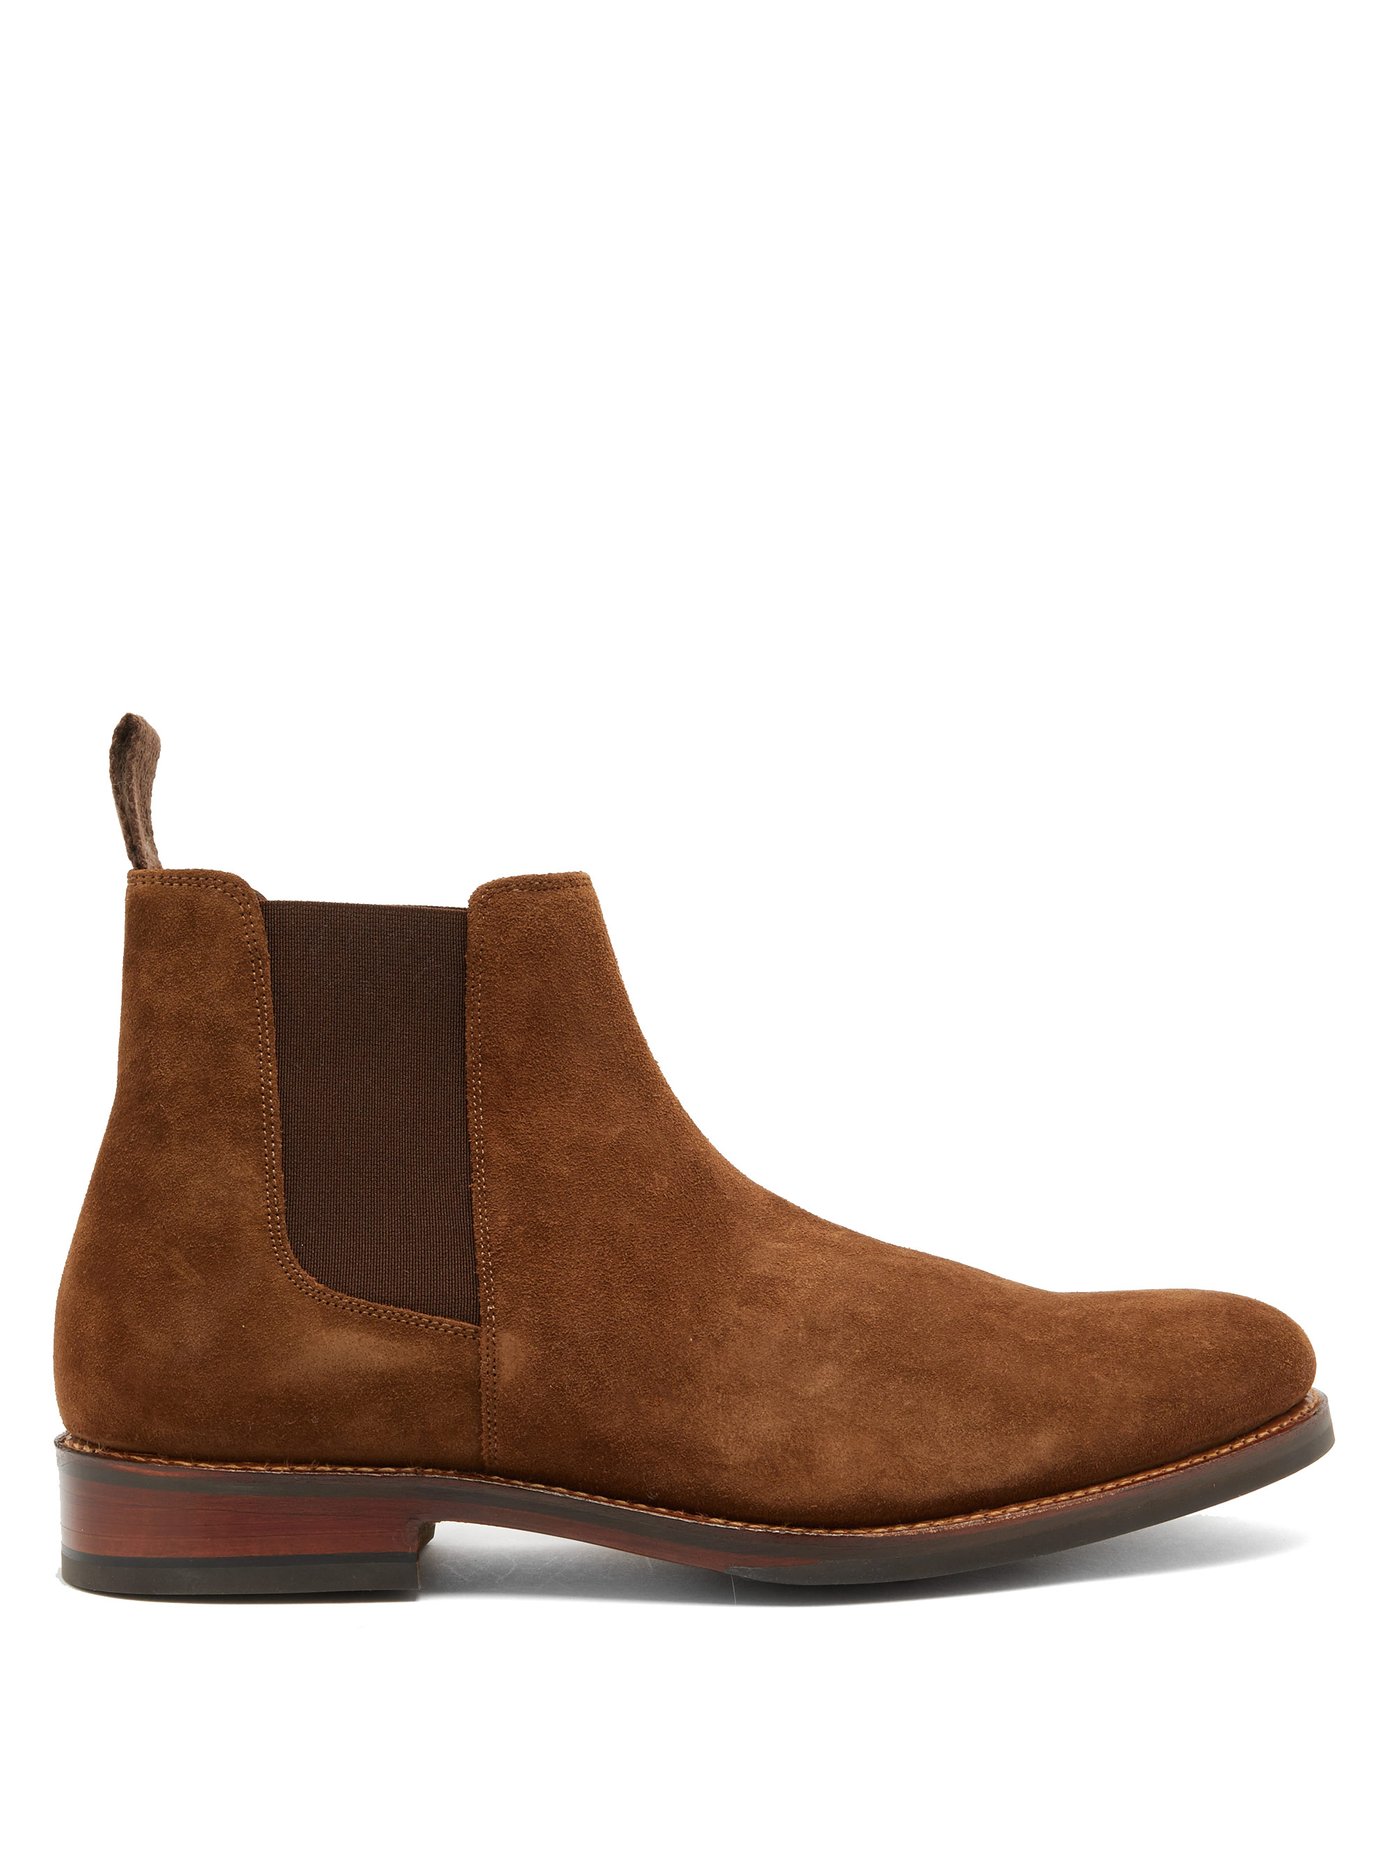 suede chelsea boots near me